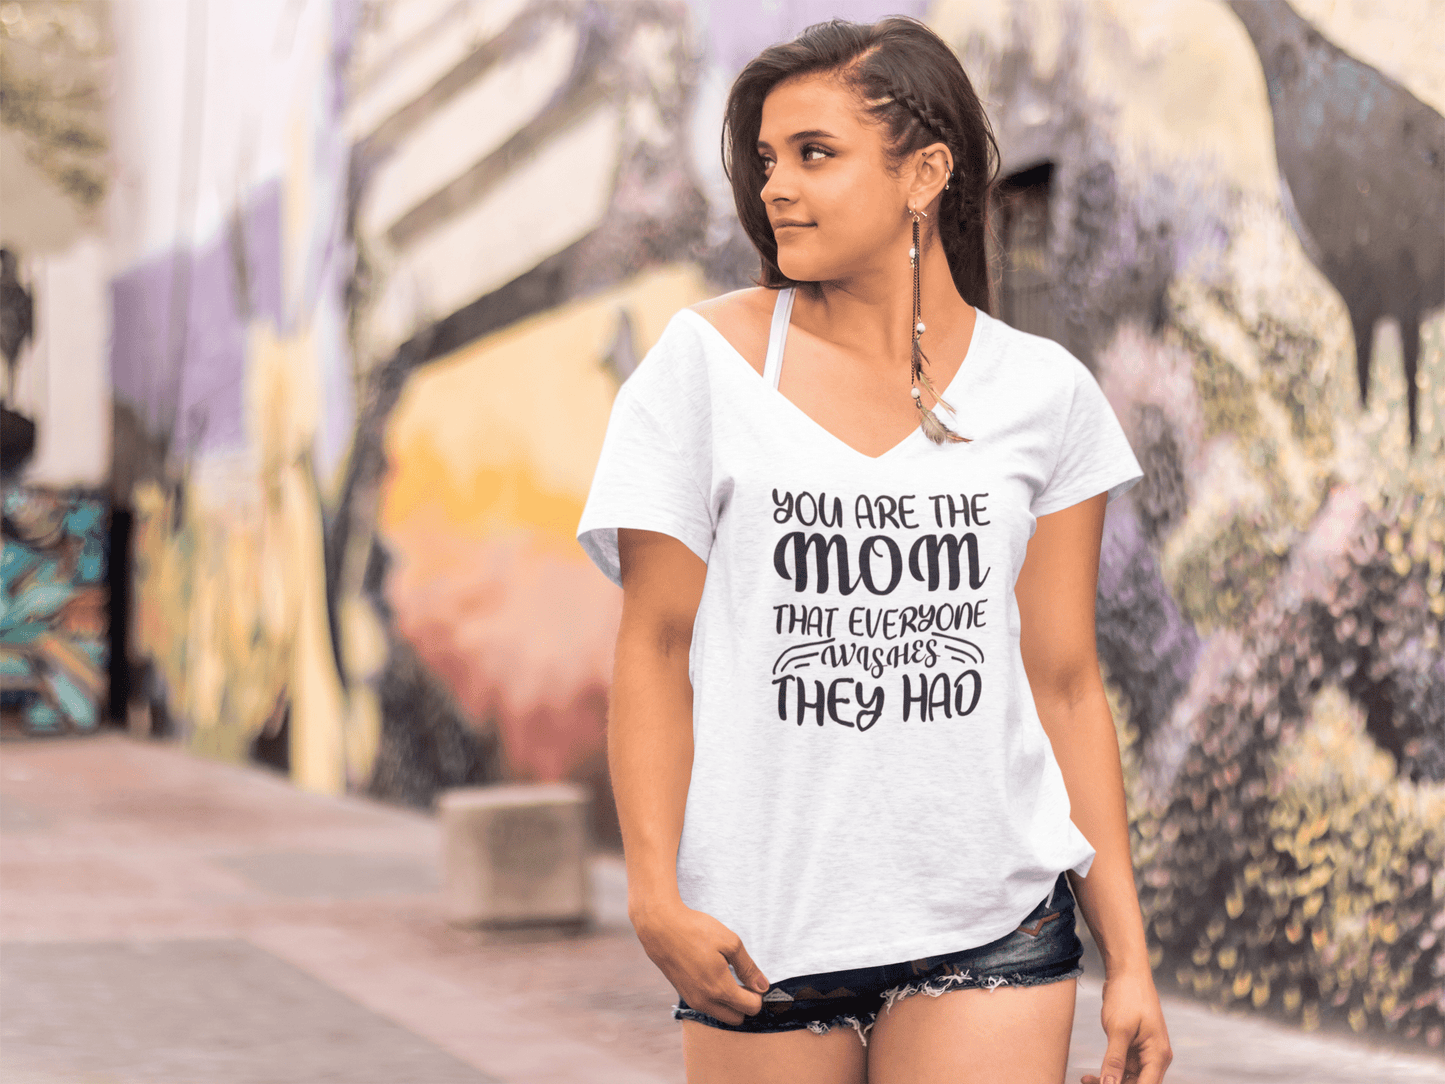 ULTRABASIC Women's T-Shirt You are the Mom That Everyone Wishes They Had - Mother's Gift Tee Shirt Tops